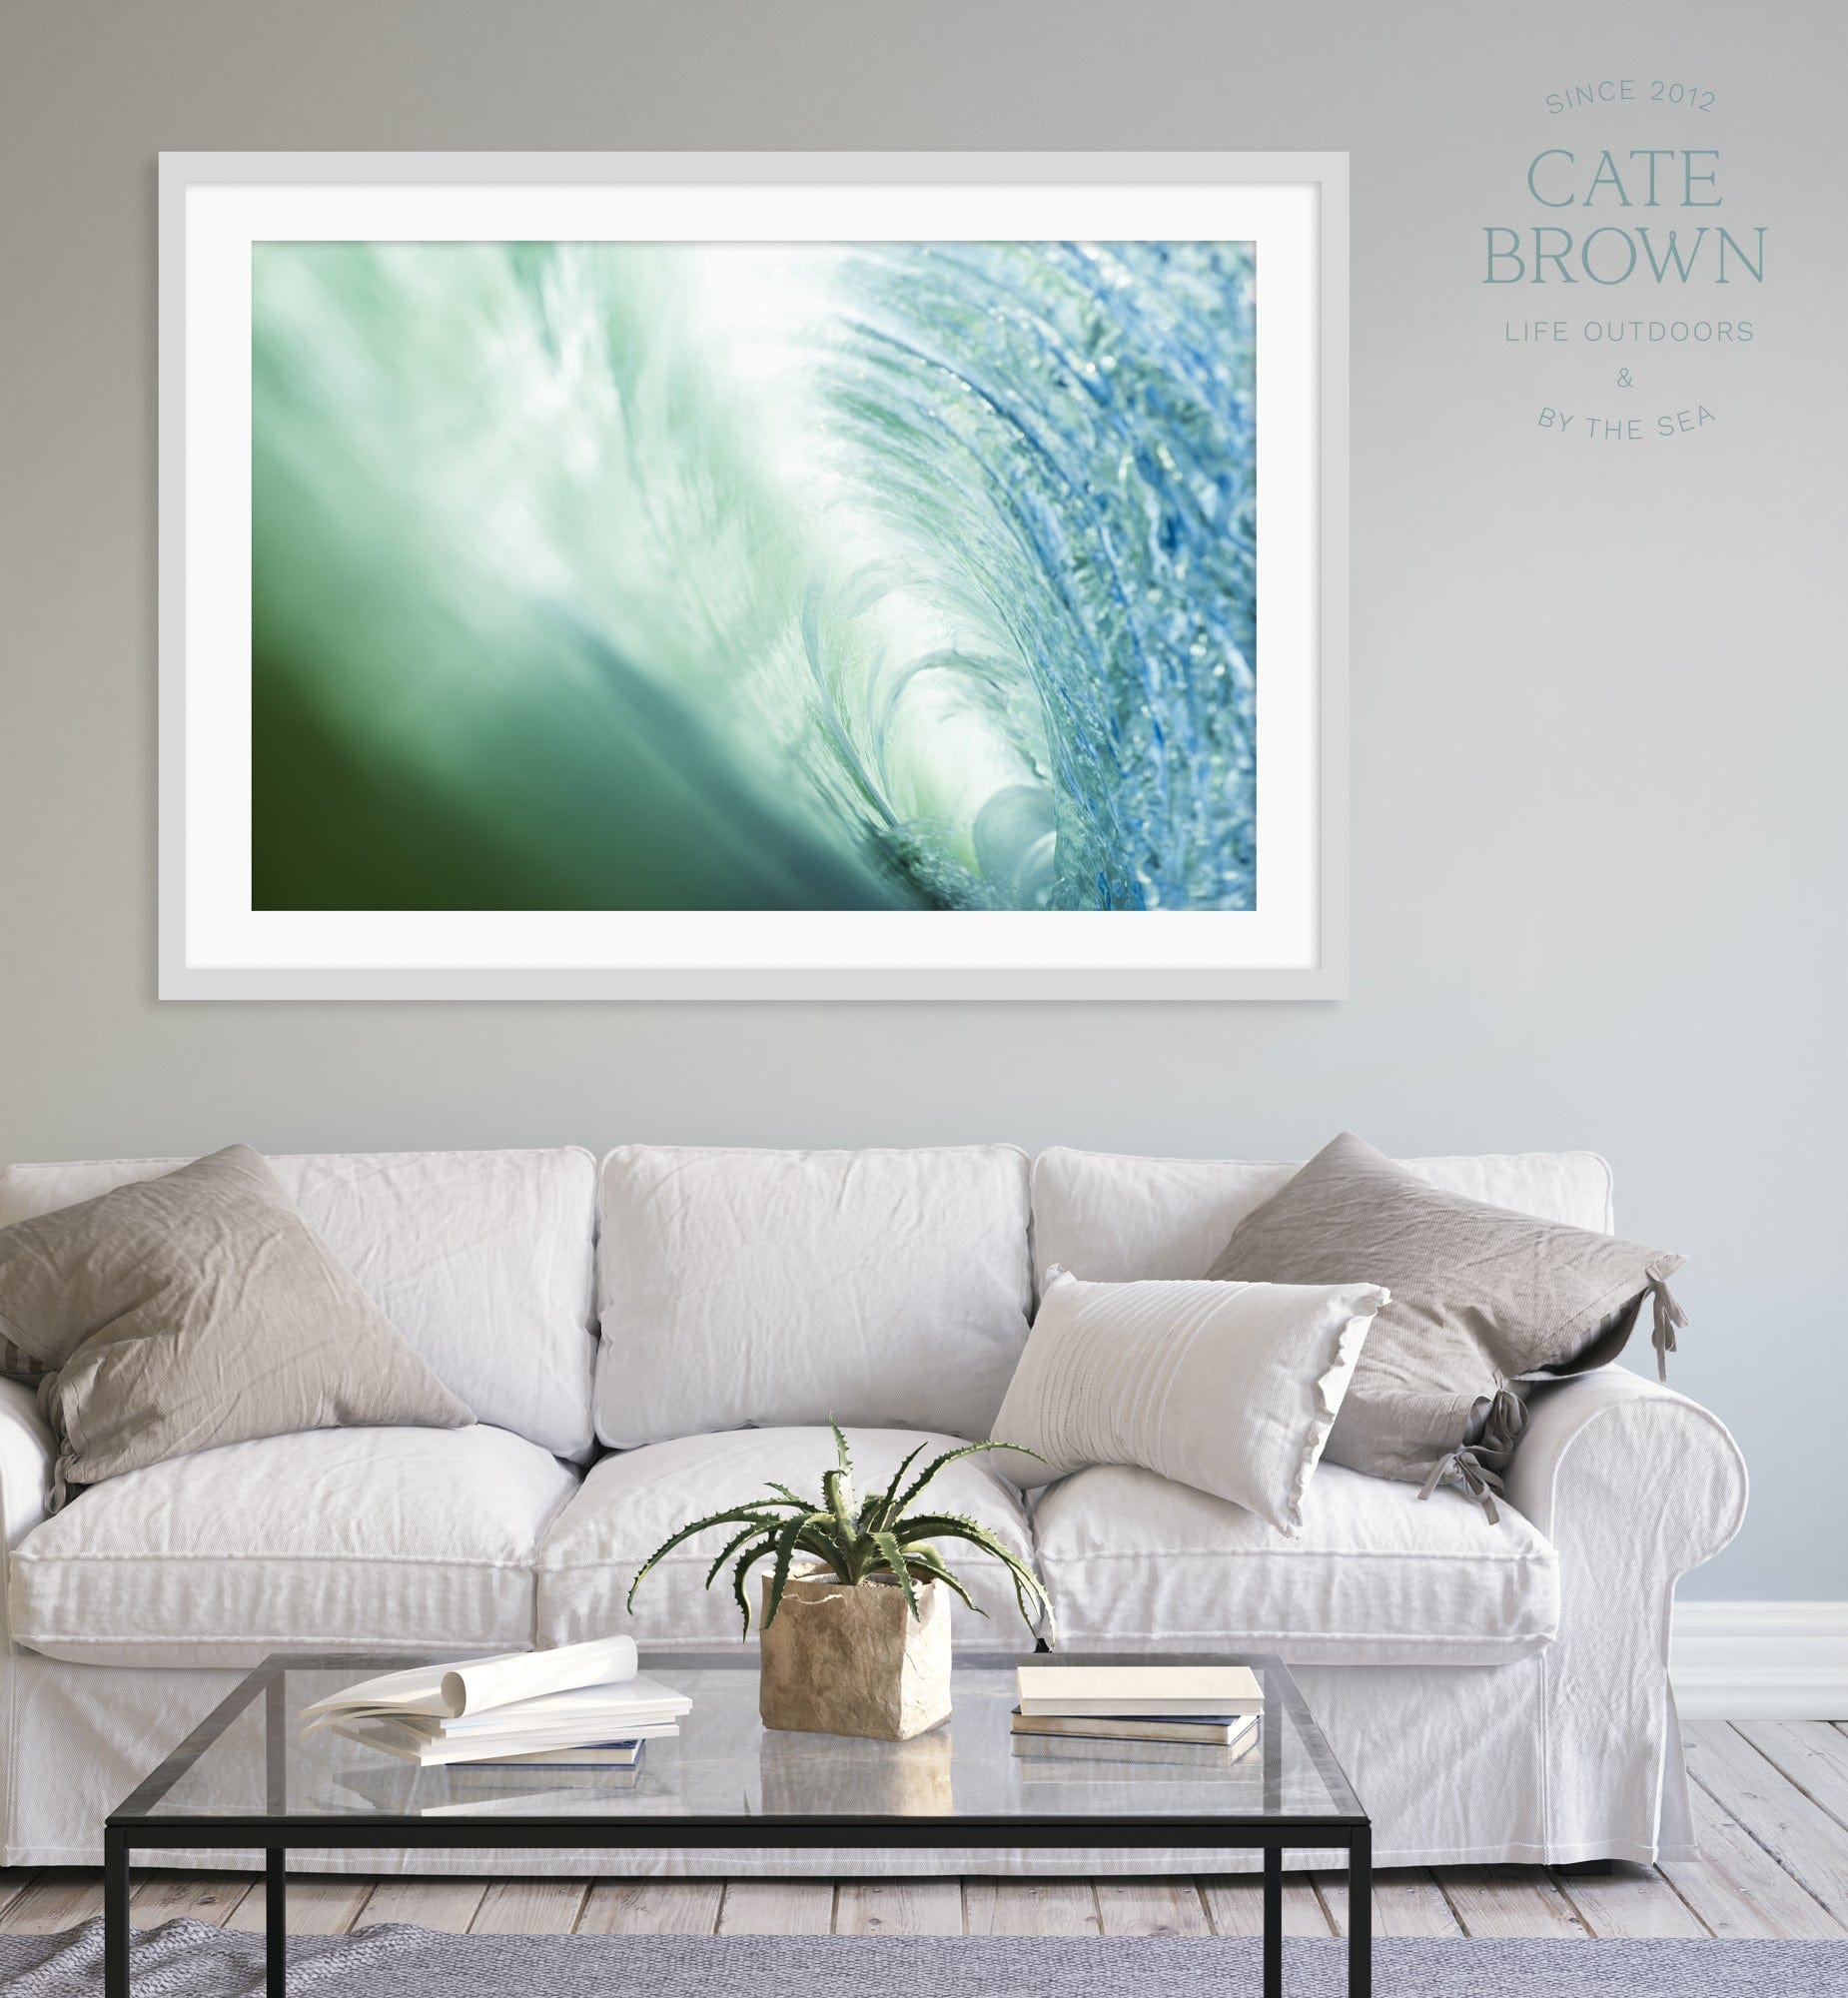 Cate Brown Photo Fine Art Print / 8"x12" / None (Print Only) Aqua Vision  //  Ocean Photography Made to Order Ocean Fine Art